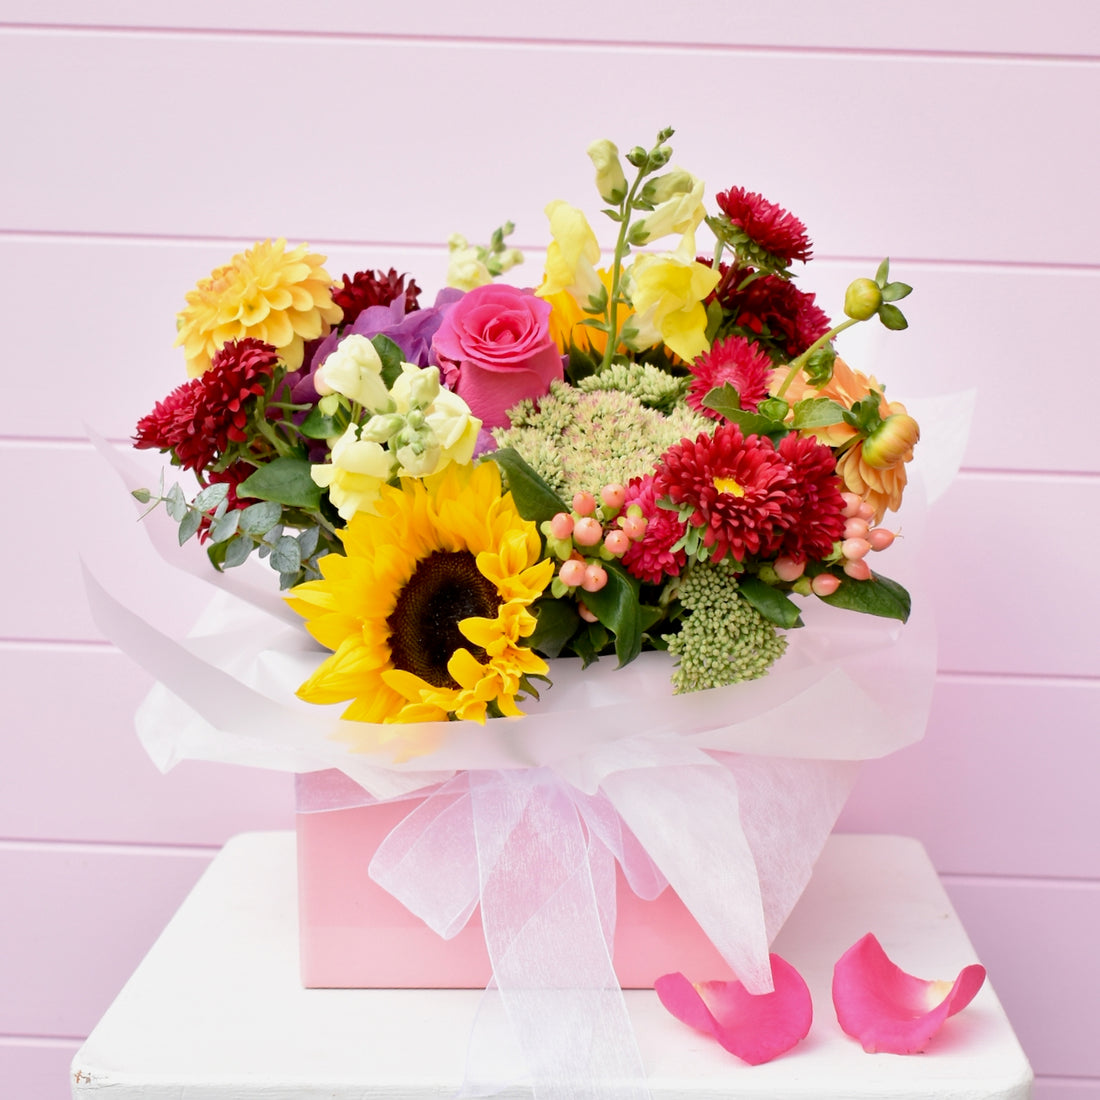 Pink box containing a colourful bouquet of flowers including sunflowers &amp; roses